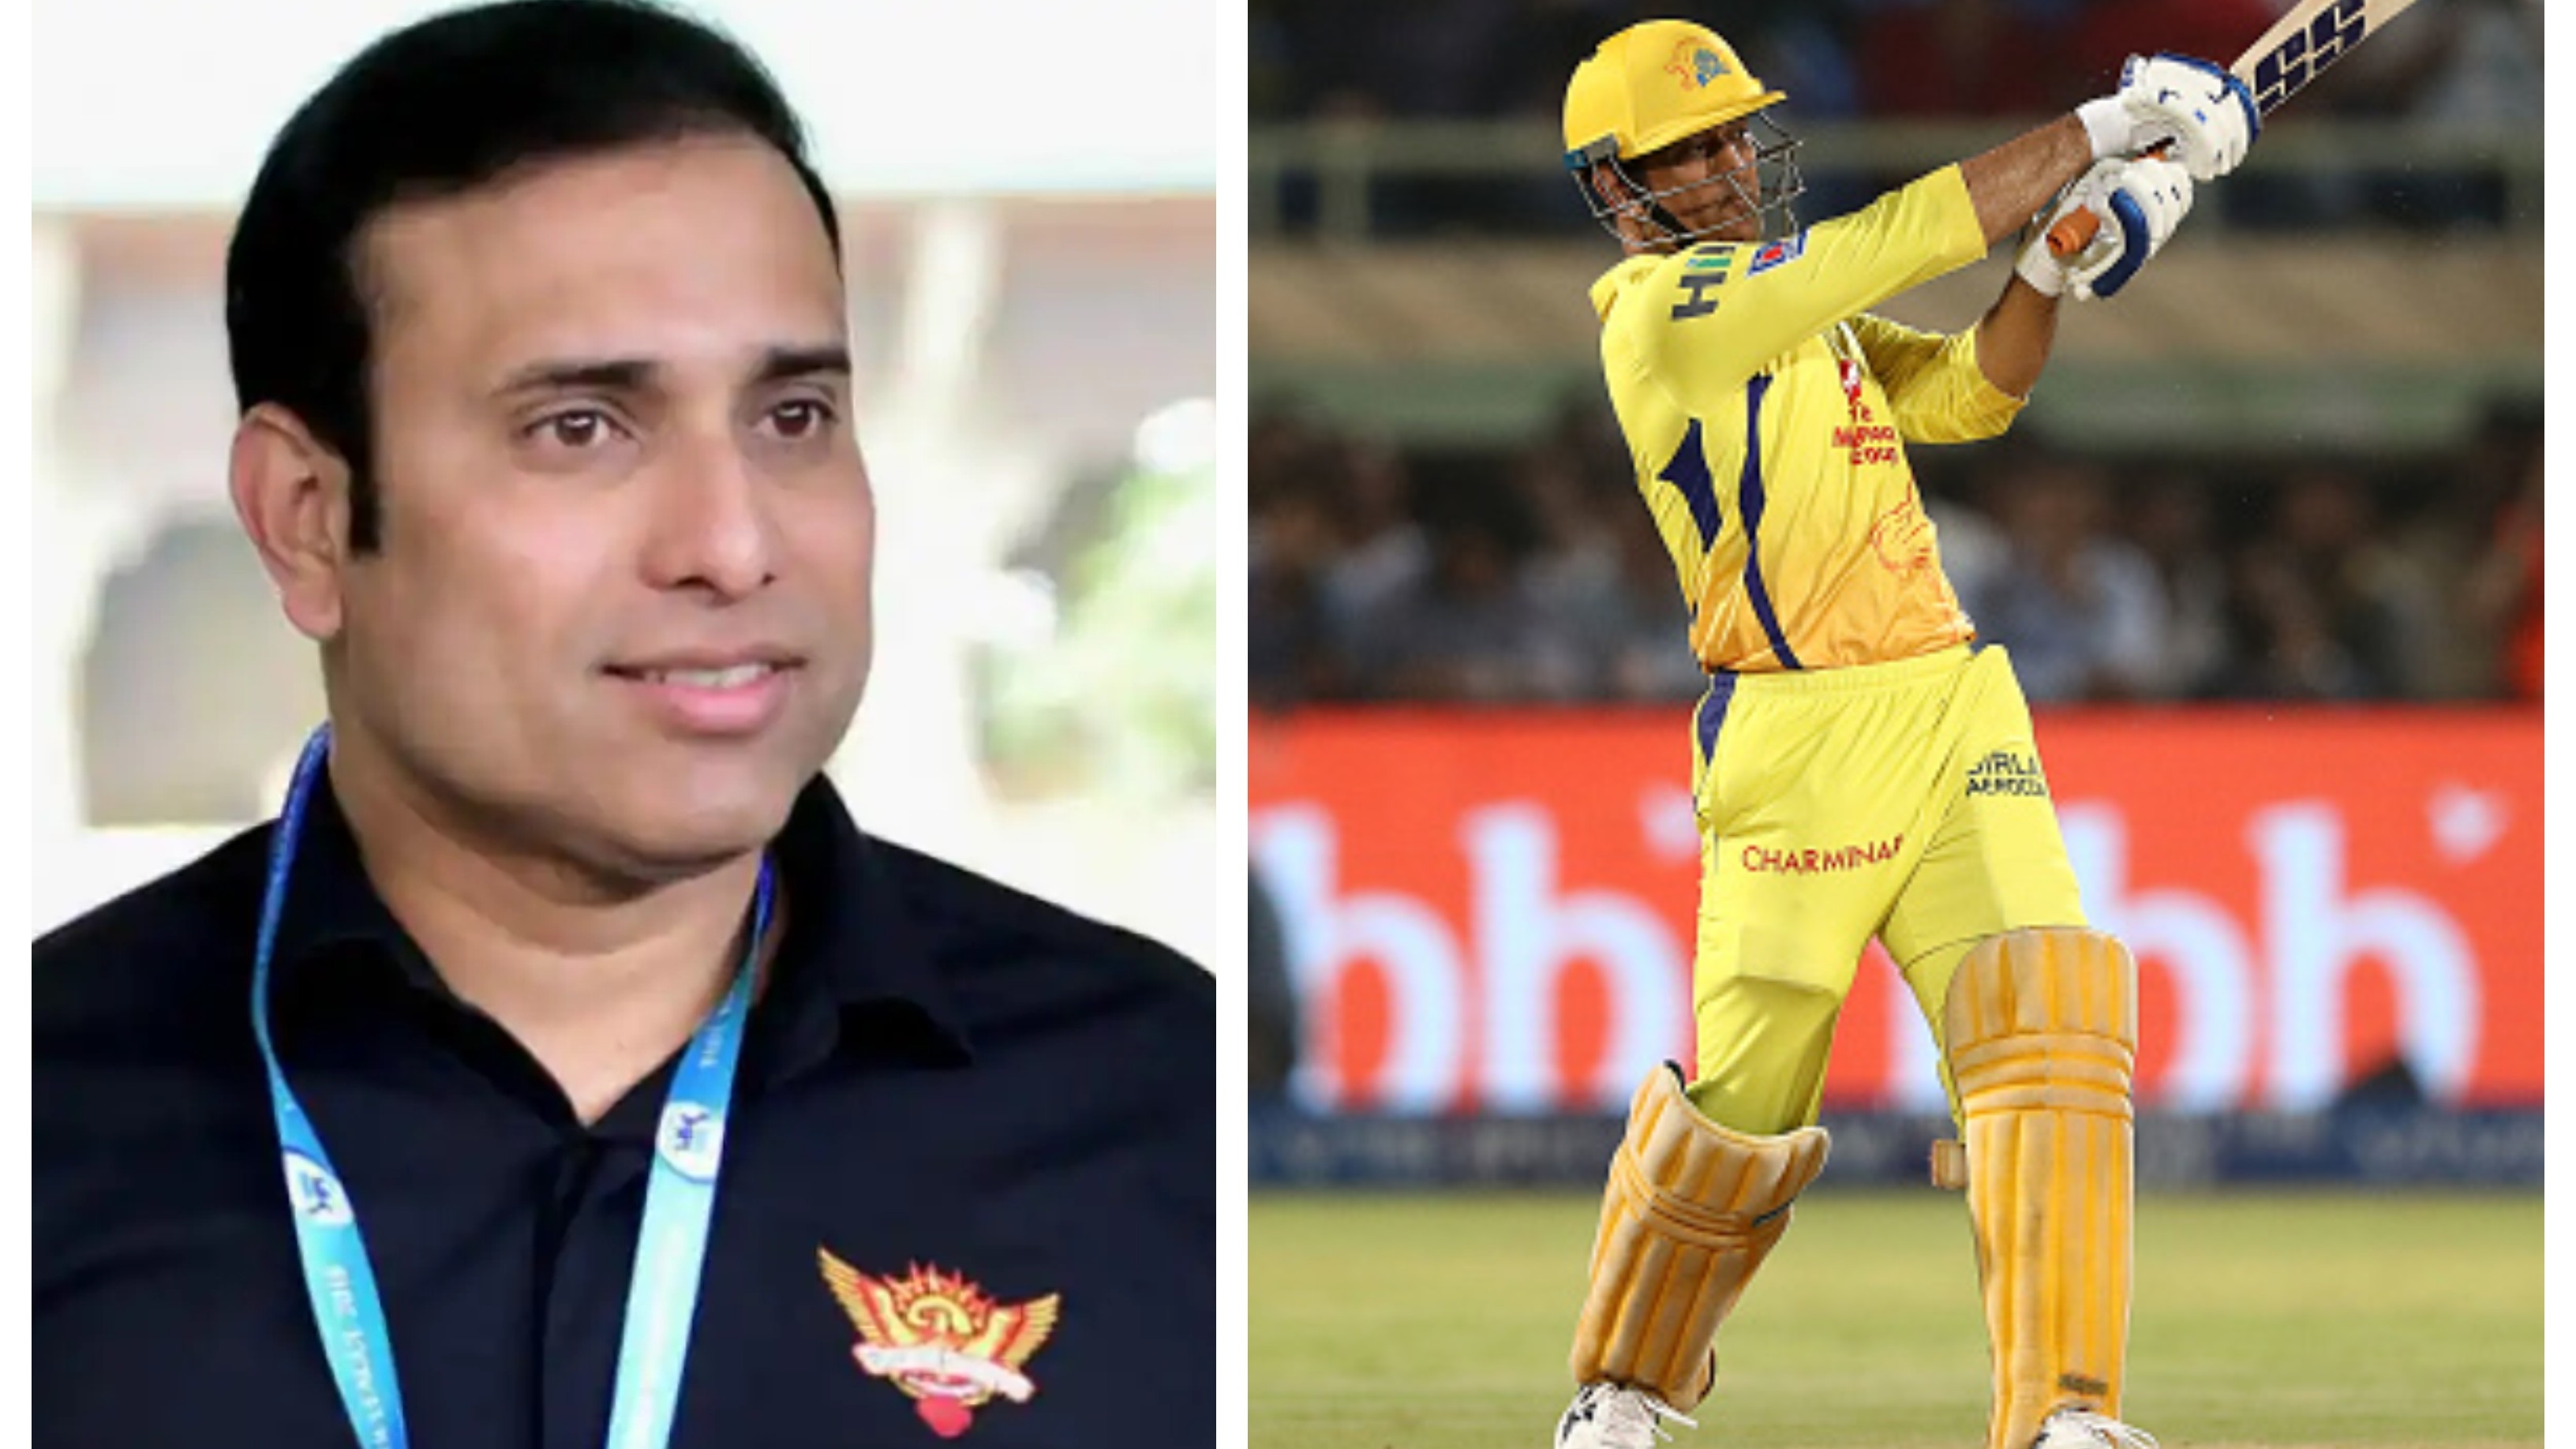 ‘MS Dhoni's farewell match will be at Chepauk for CSK’, says VVS Laxman